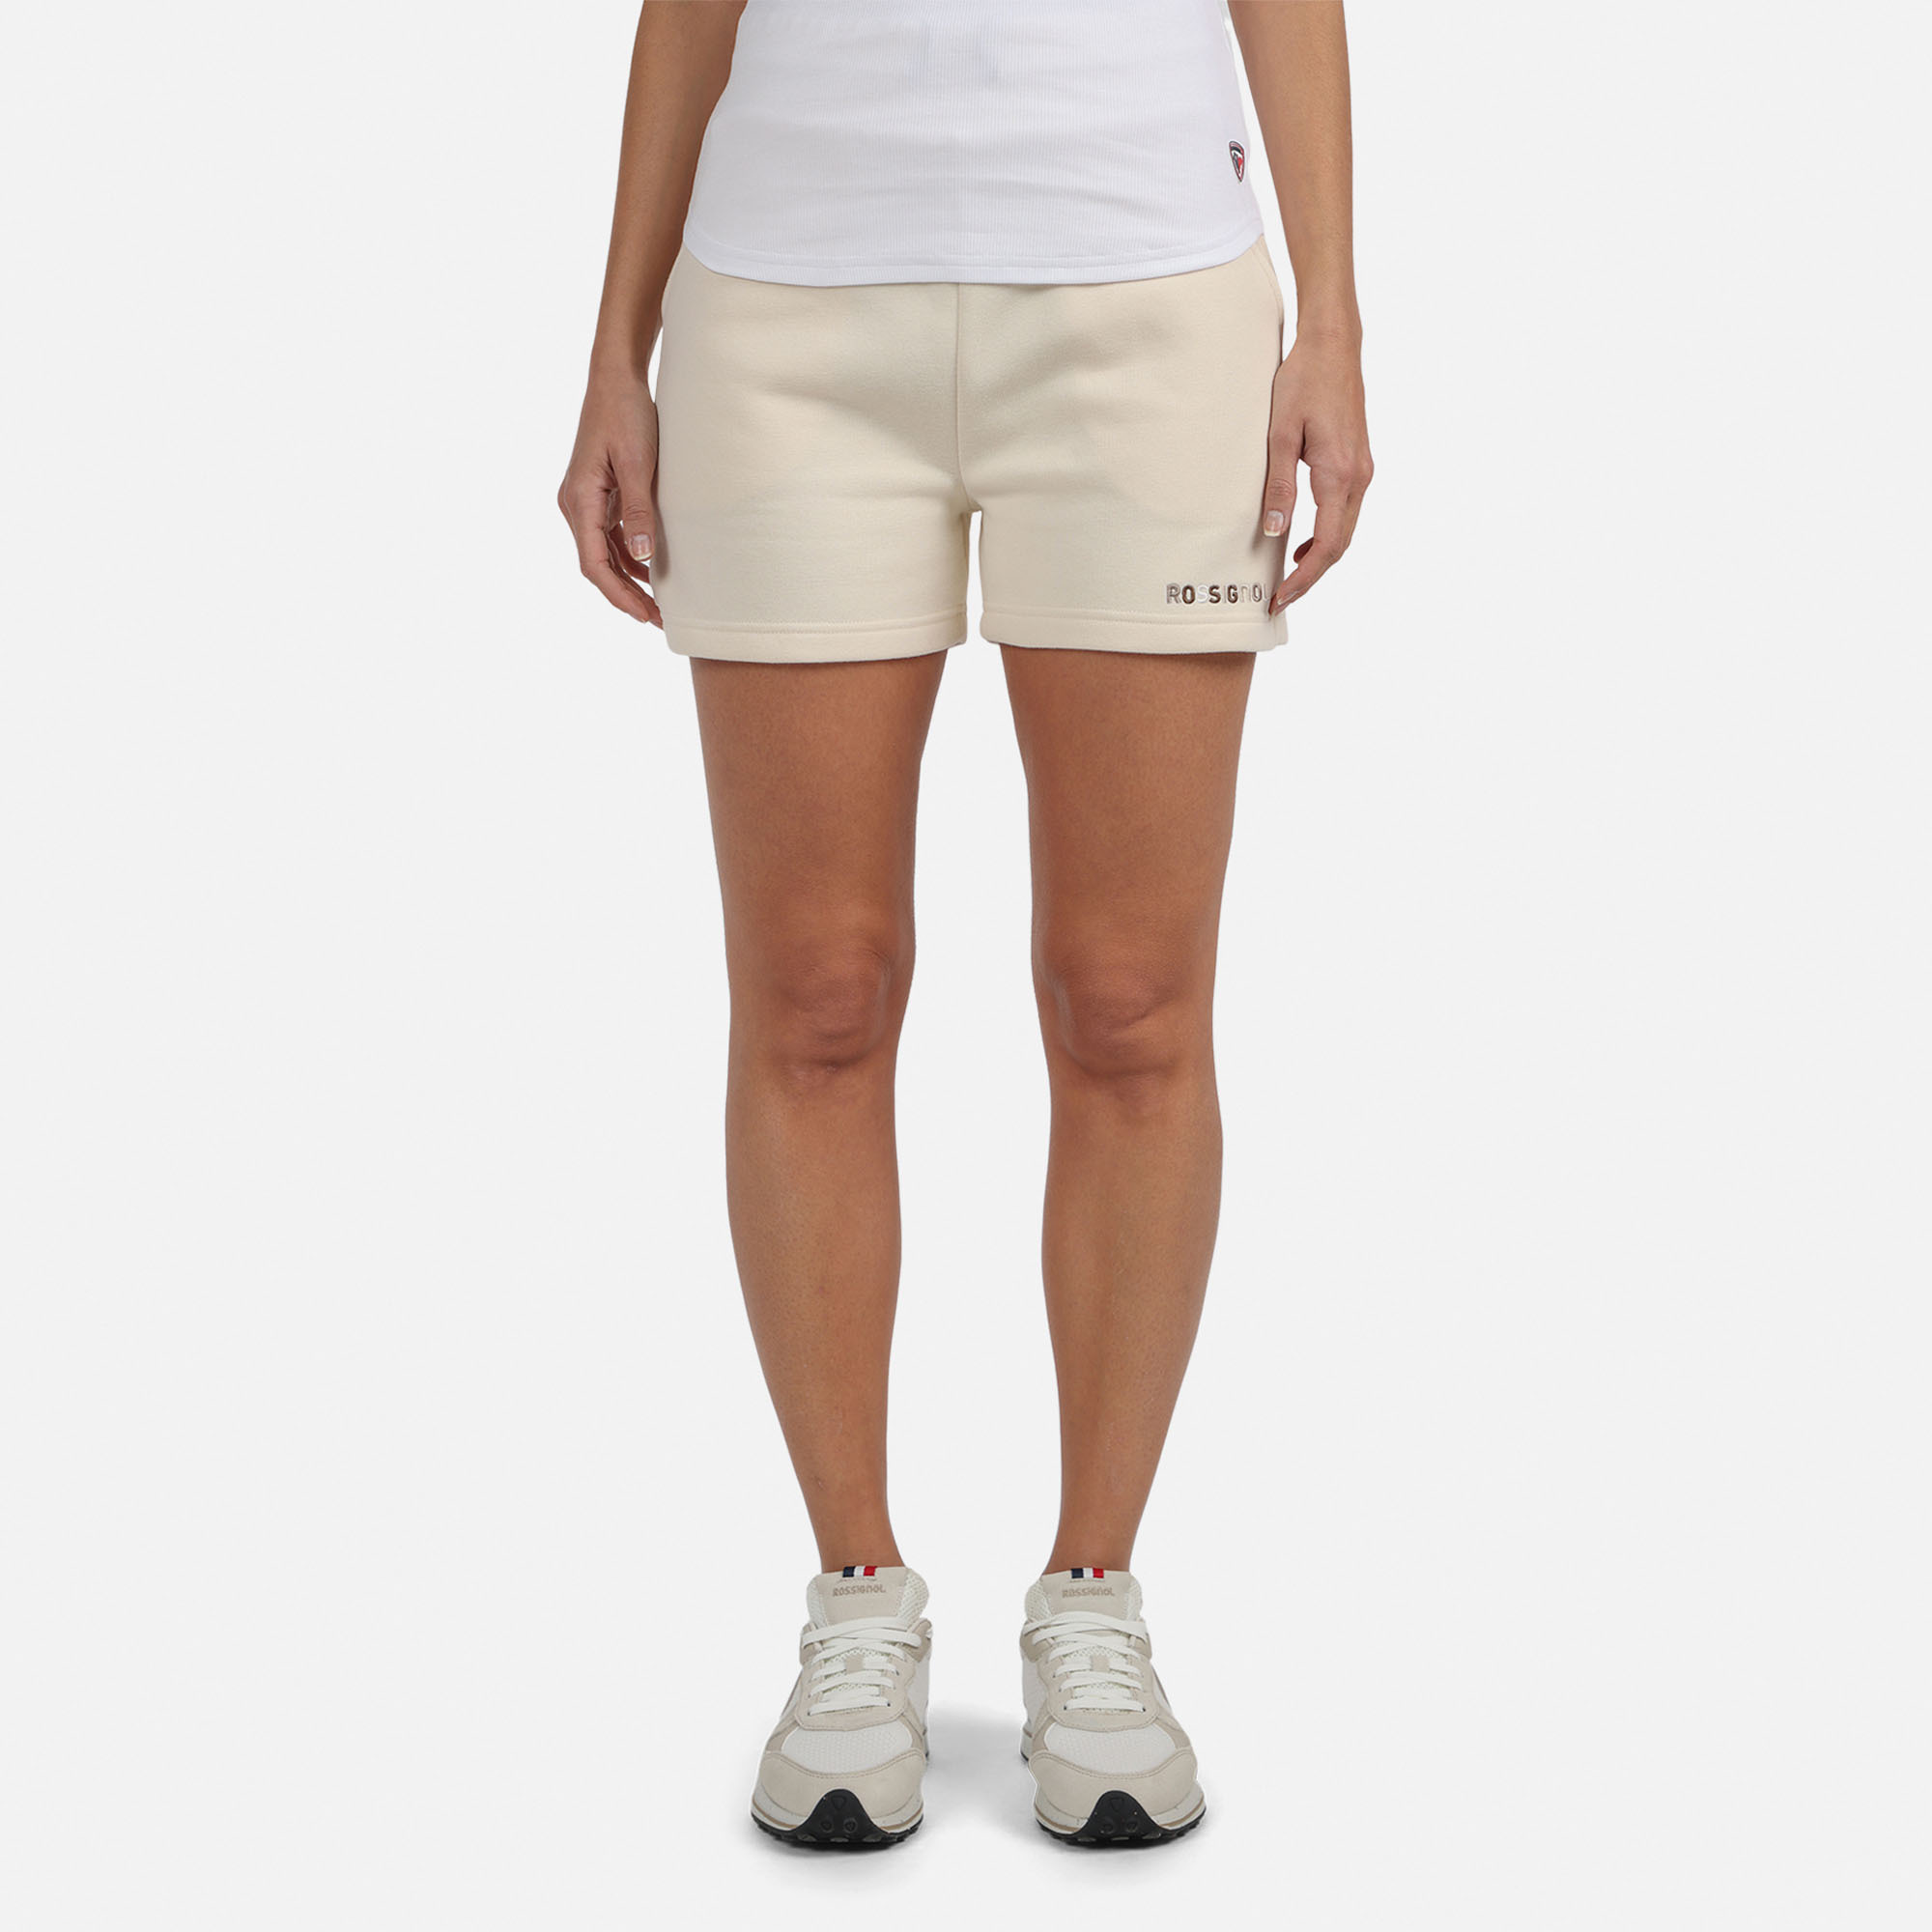 Women's Embroidery Shorts